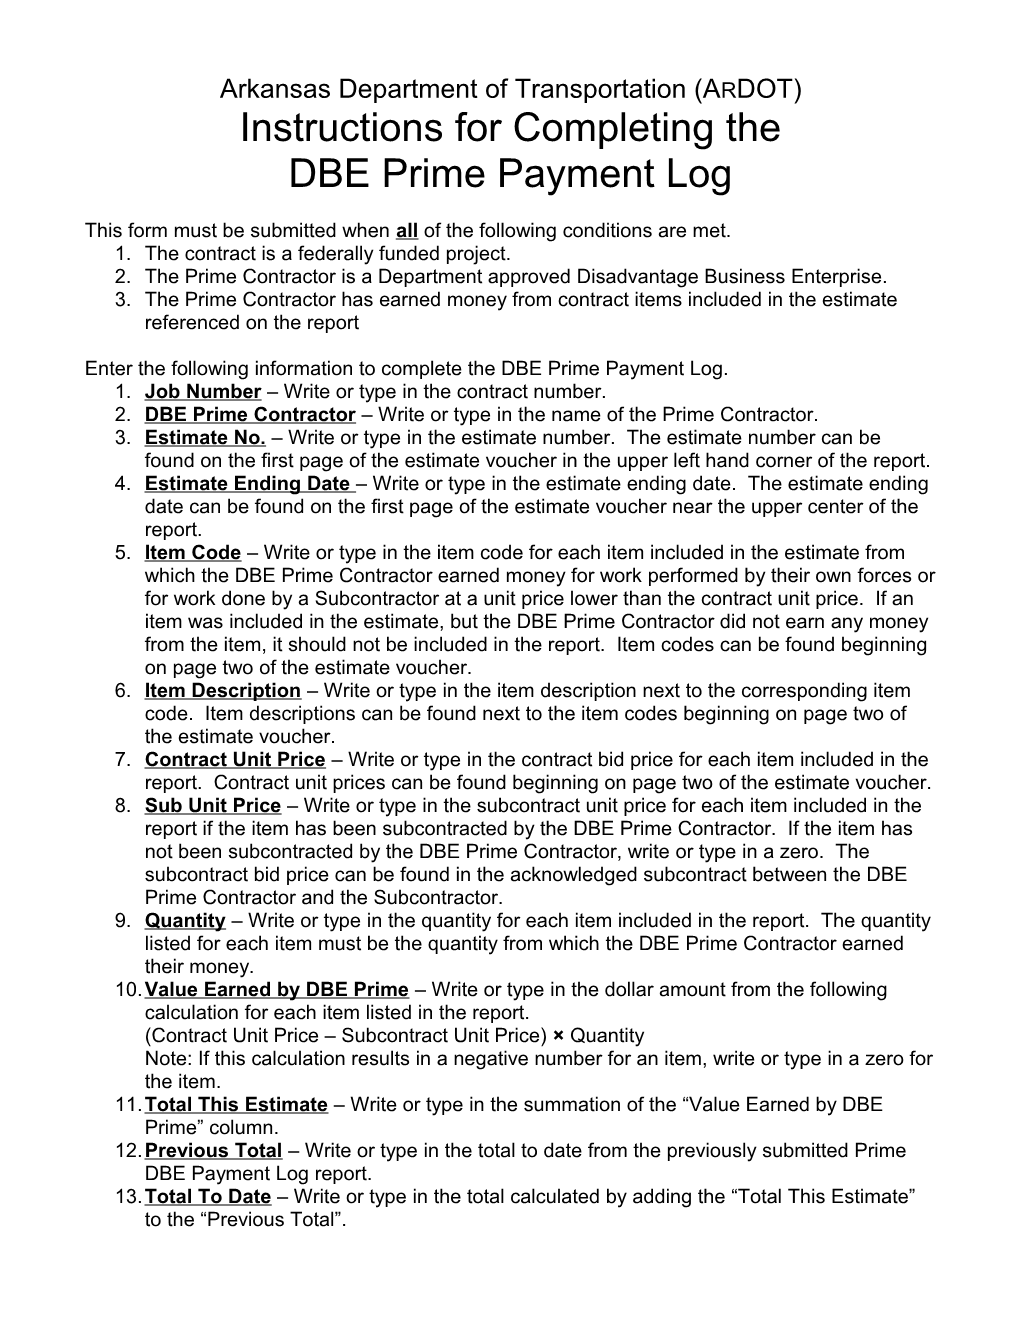 DBE Payment Log Instructions